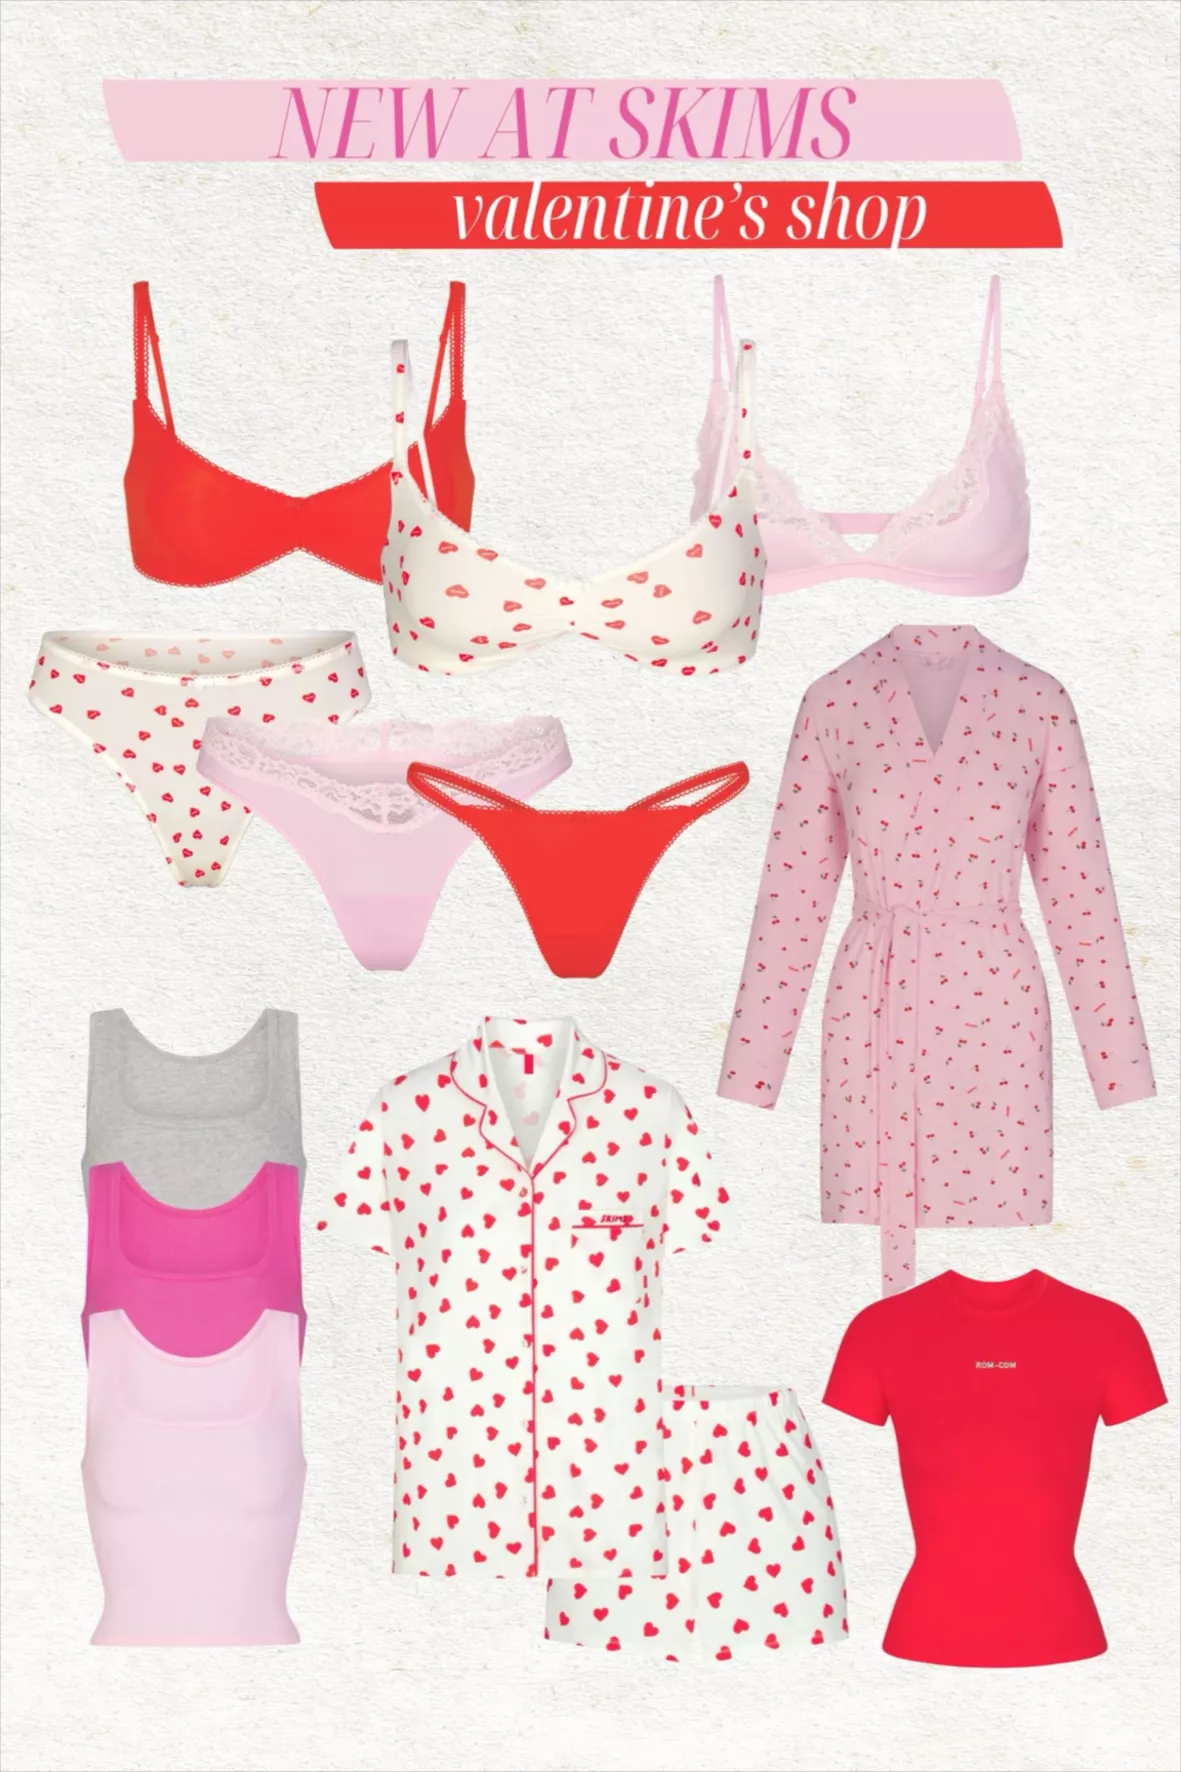 Super cute' Skims' Valentine's collection has been restocked